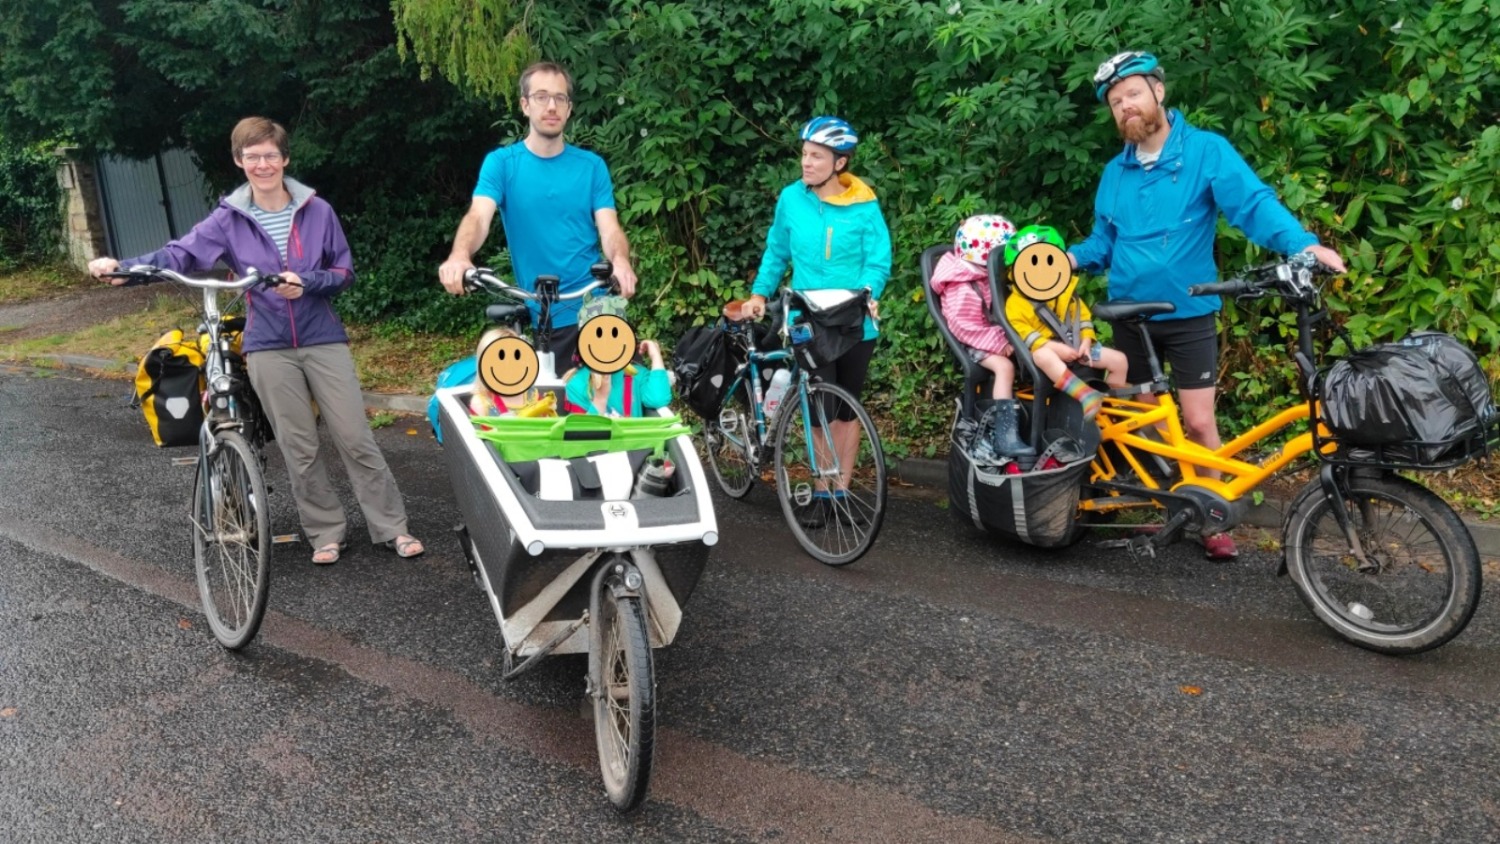 A group of adults with an assortment of cargo bikes and children on board